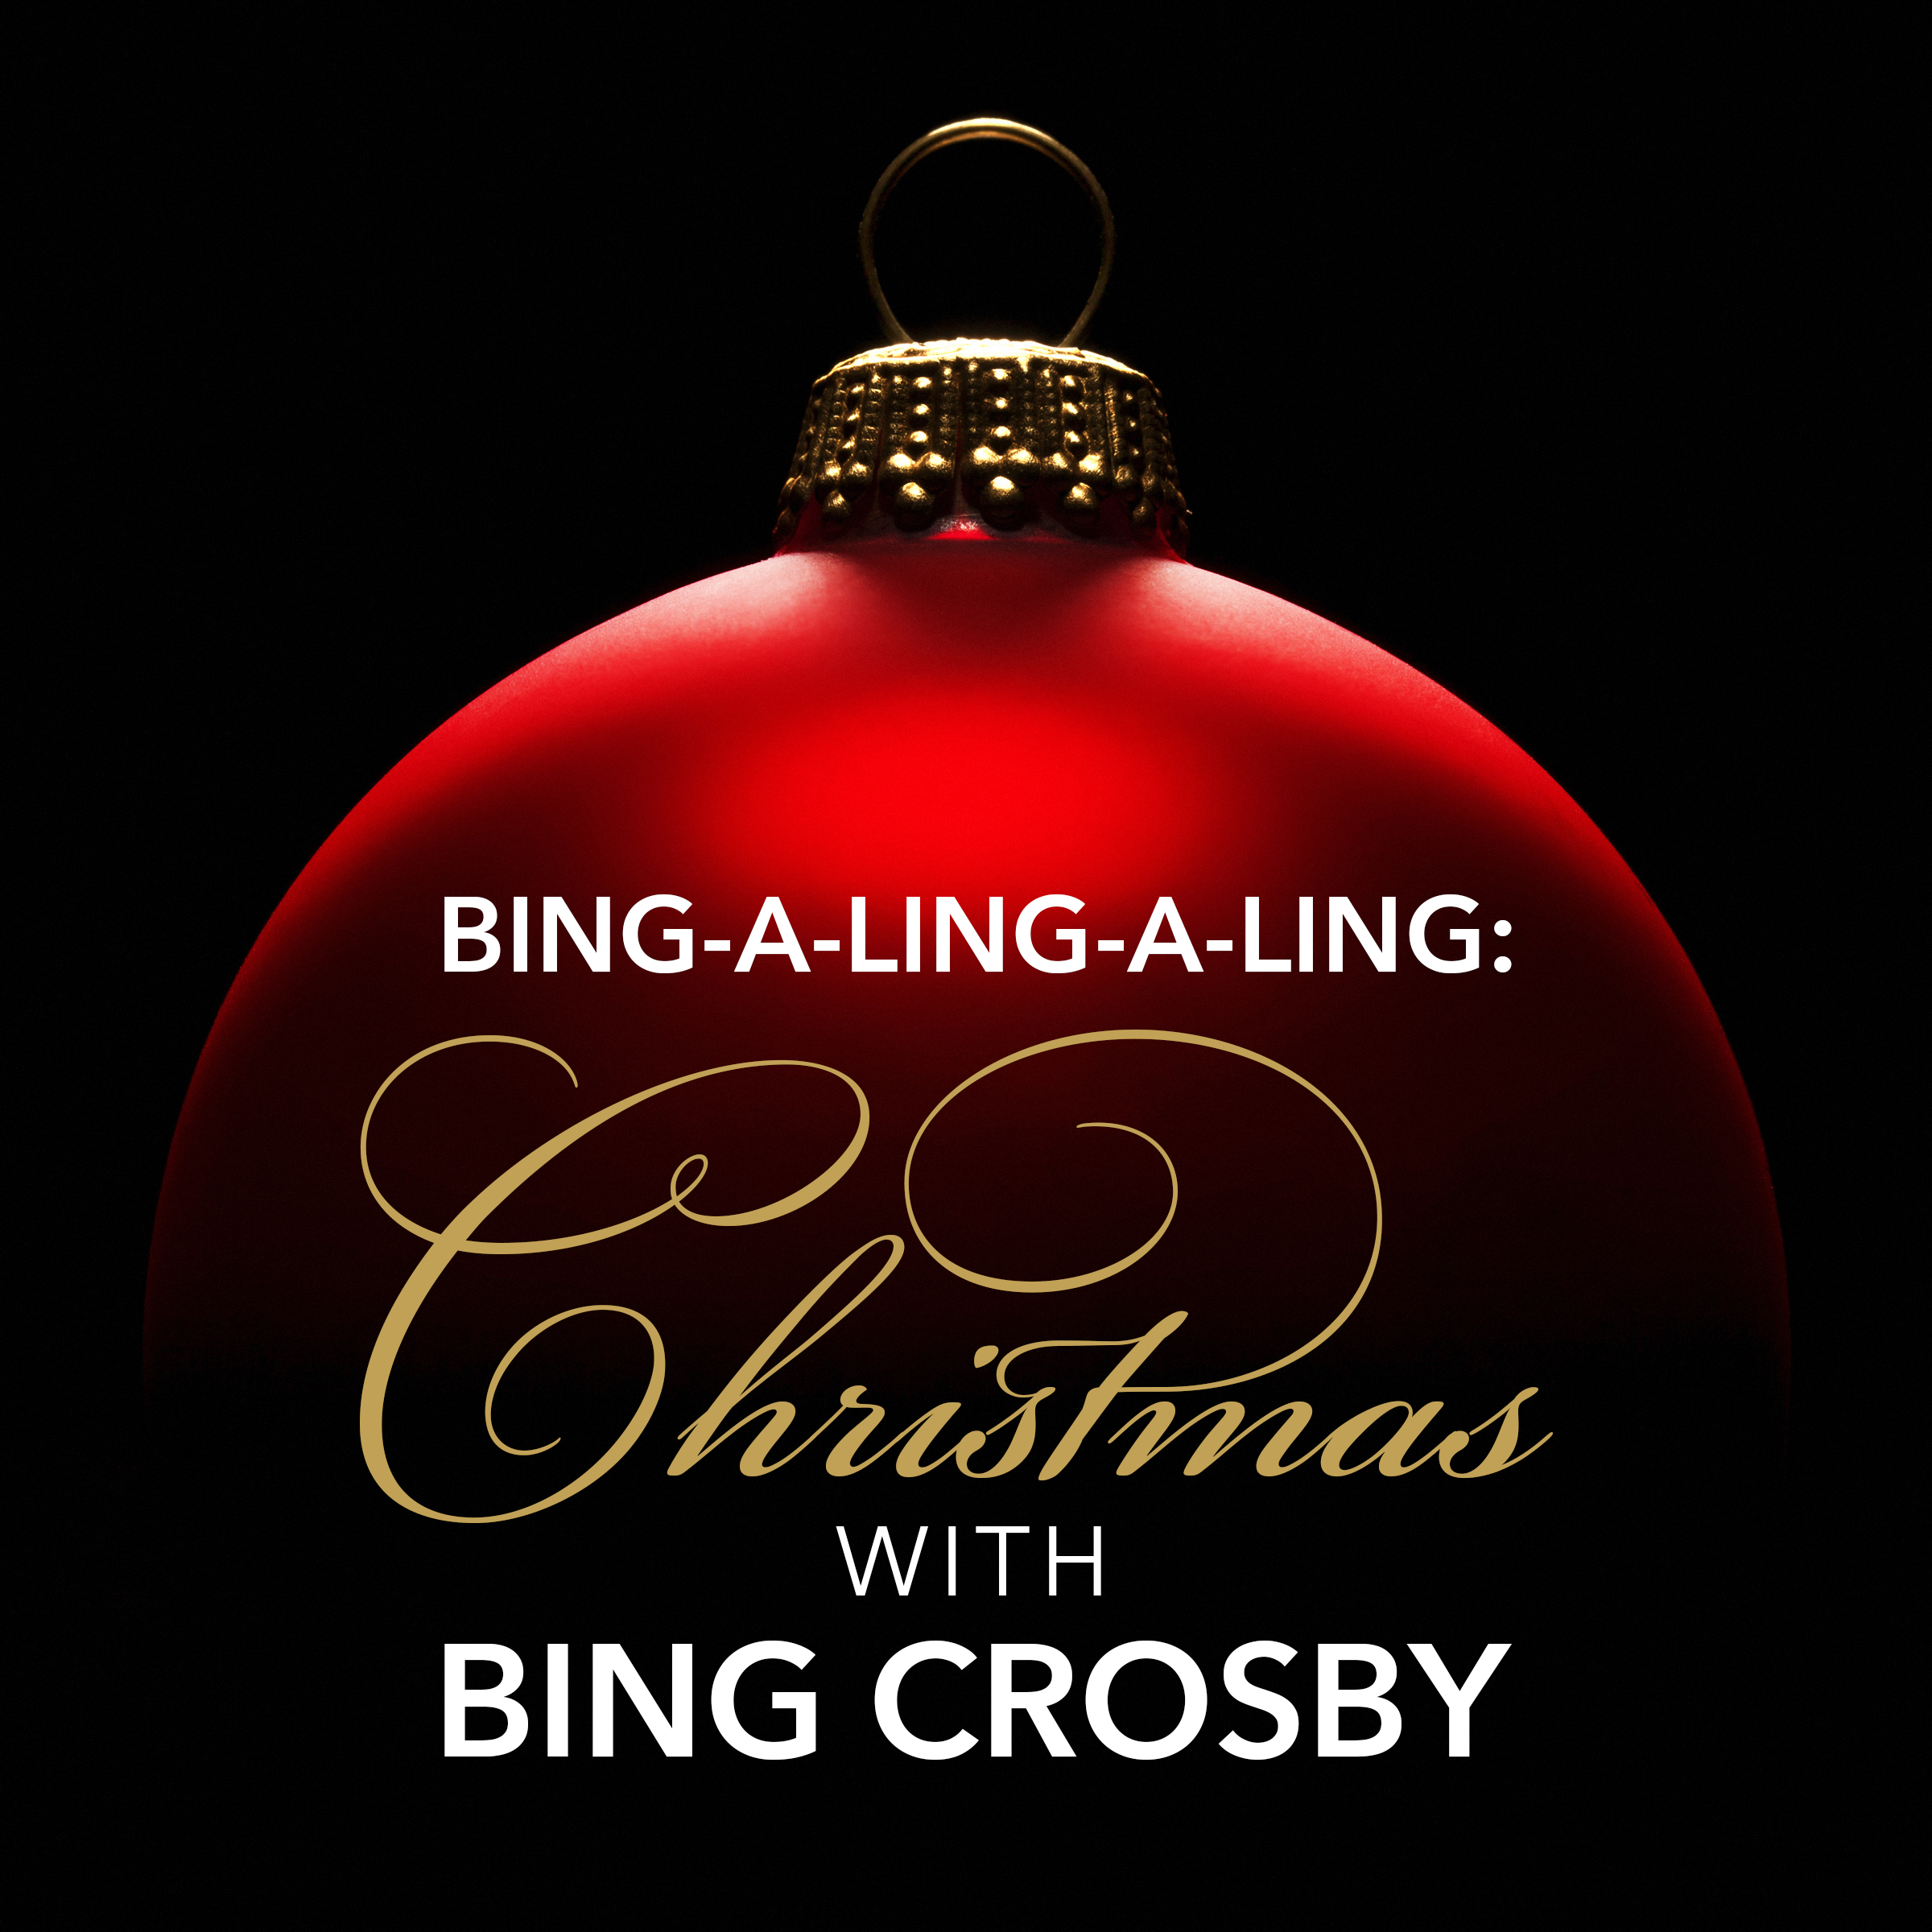 Bing-a-ling-a-ling: Christmas with Bing Crosby